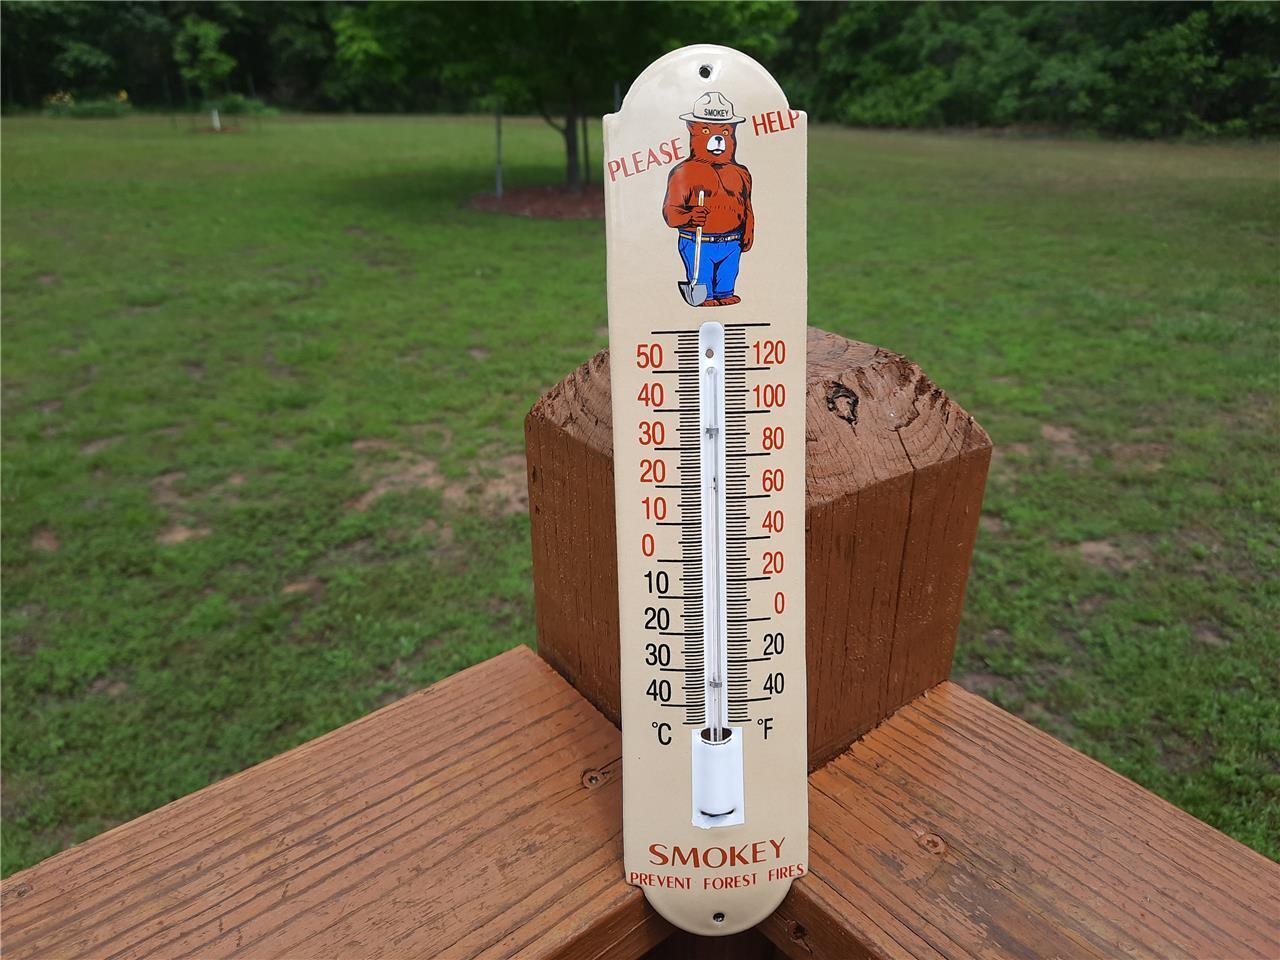 THICK PORCELAIN PLEASE HELP SMOKEY PREVENT FOREST FIRES THERMOMETER SMOKEY BEAR